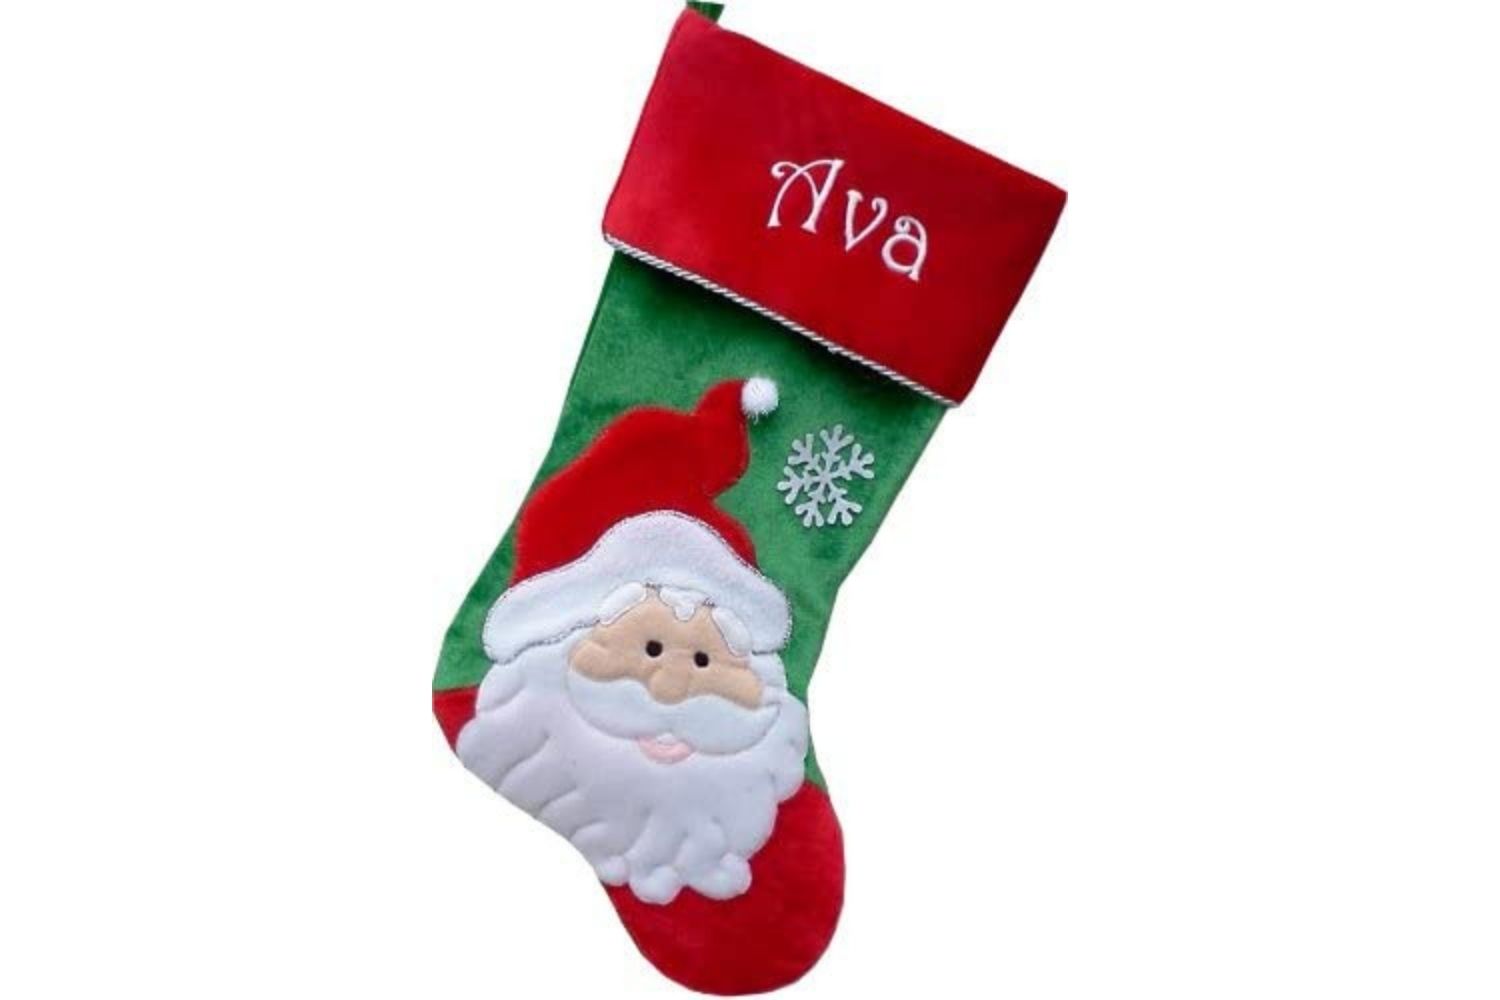 The Best Christmas Stockings Option: Happy Santa Personalized Christmas Stockings